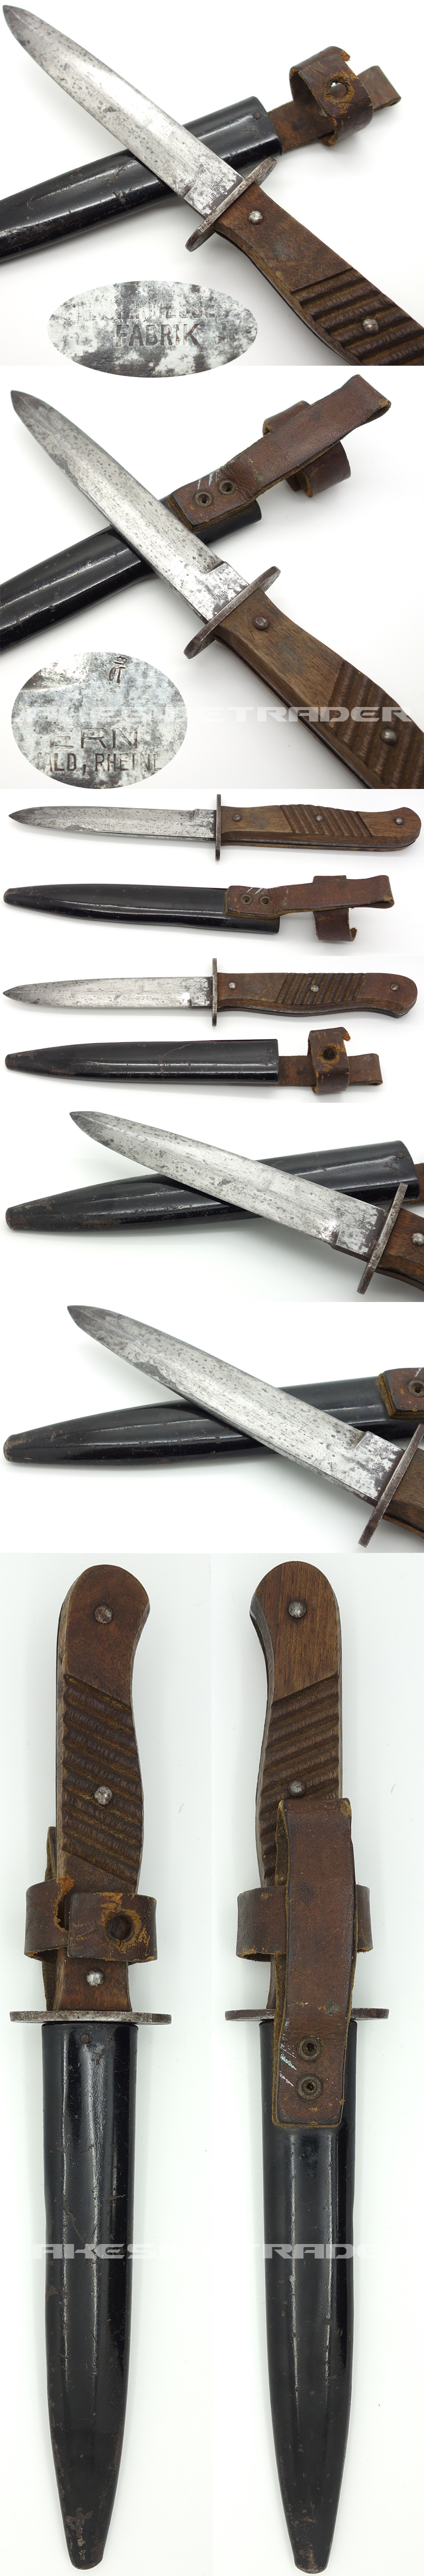 Imperial Fighting Knife by Ern